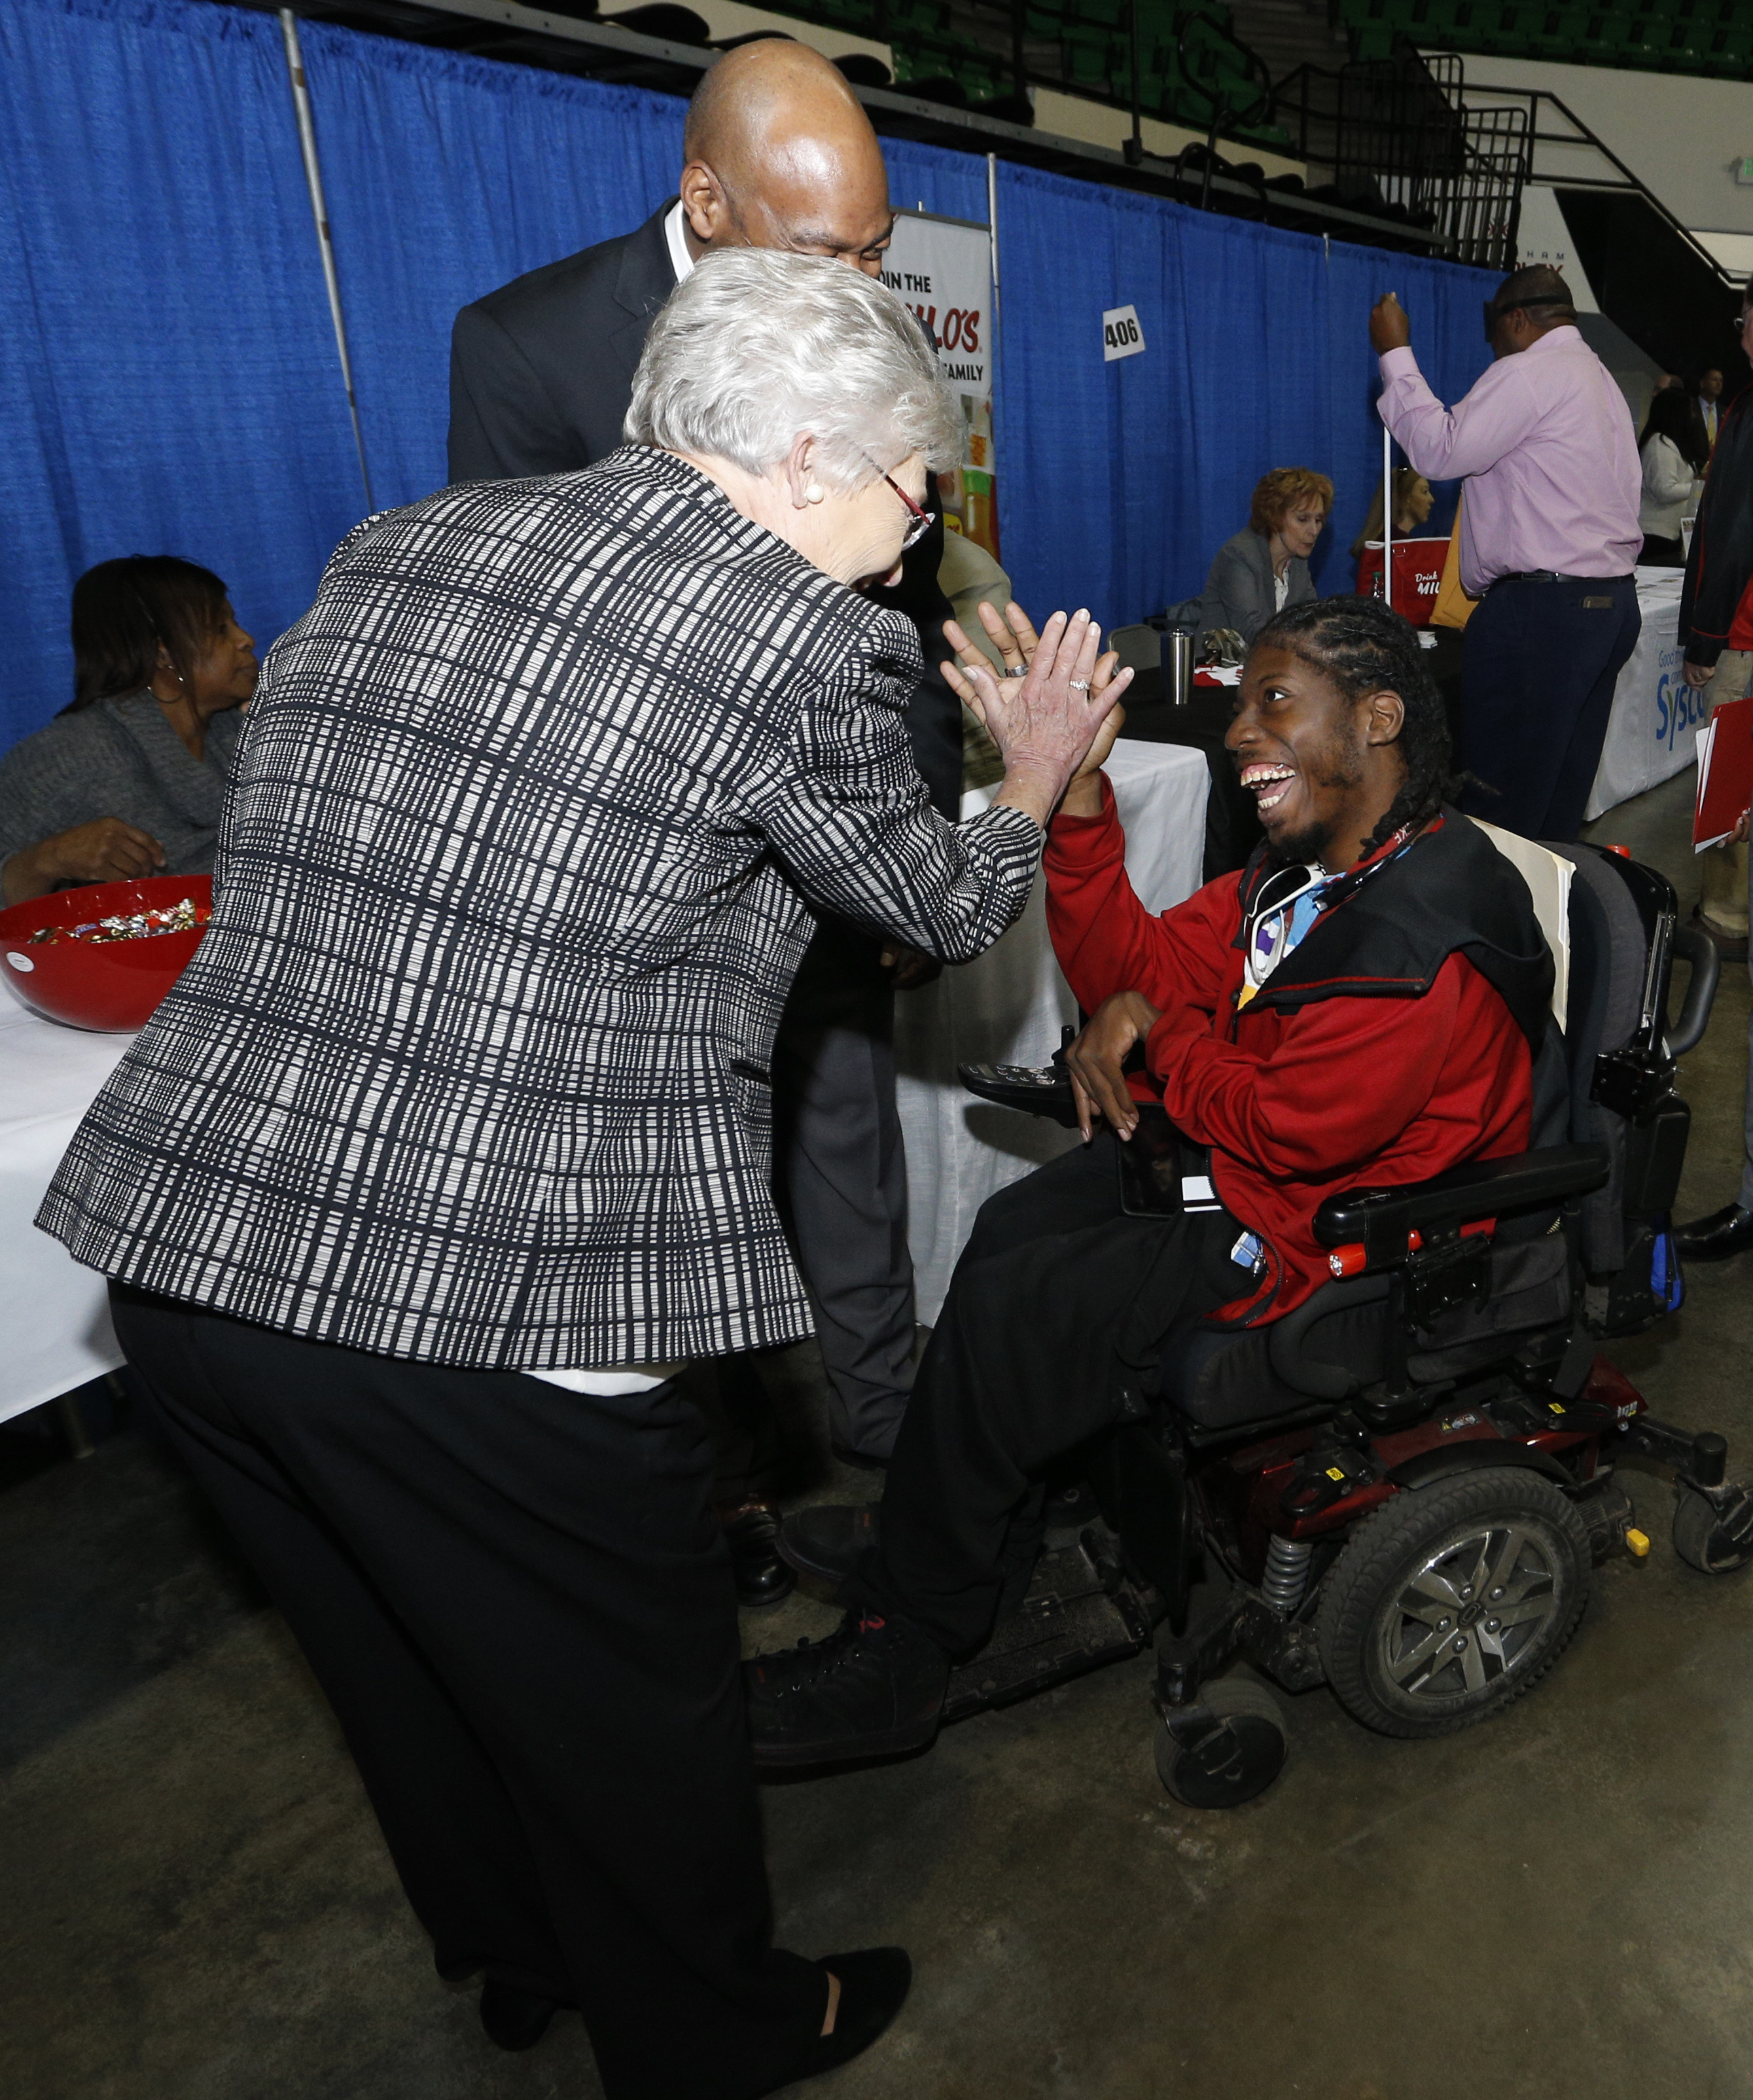 Second Annual Governor’s Job Fair for People with Disabilities to be Held October 25